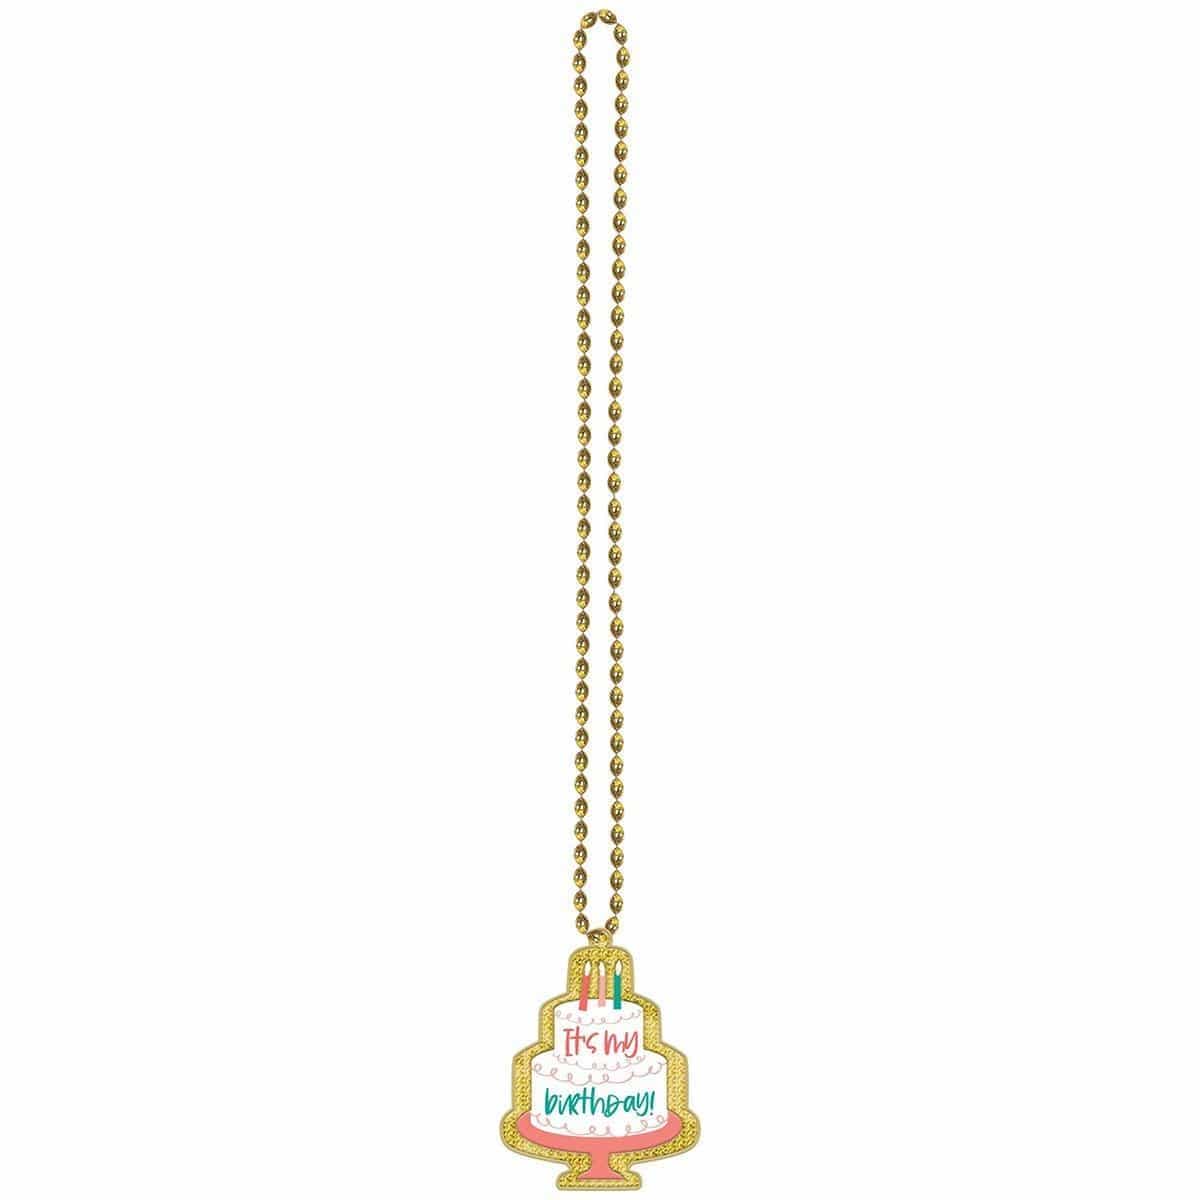 Buy General Birthday Happy Cake Day Necklace sold at Party Expert